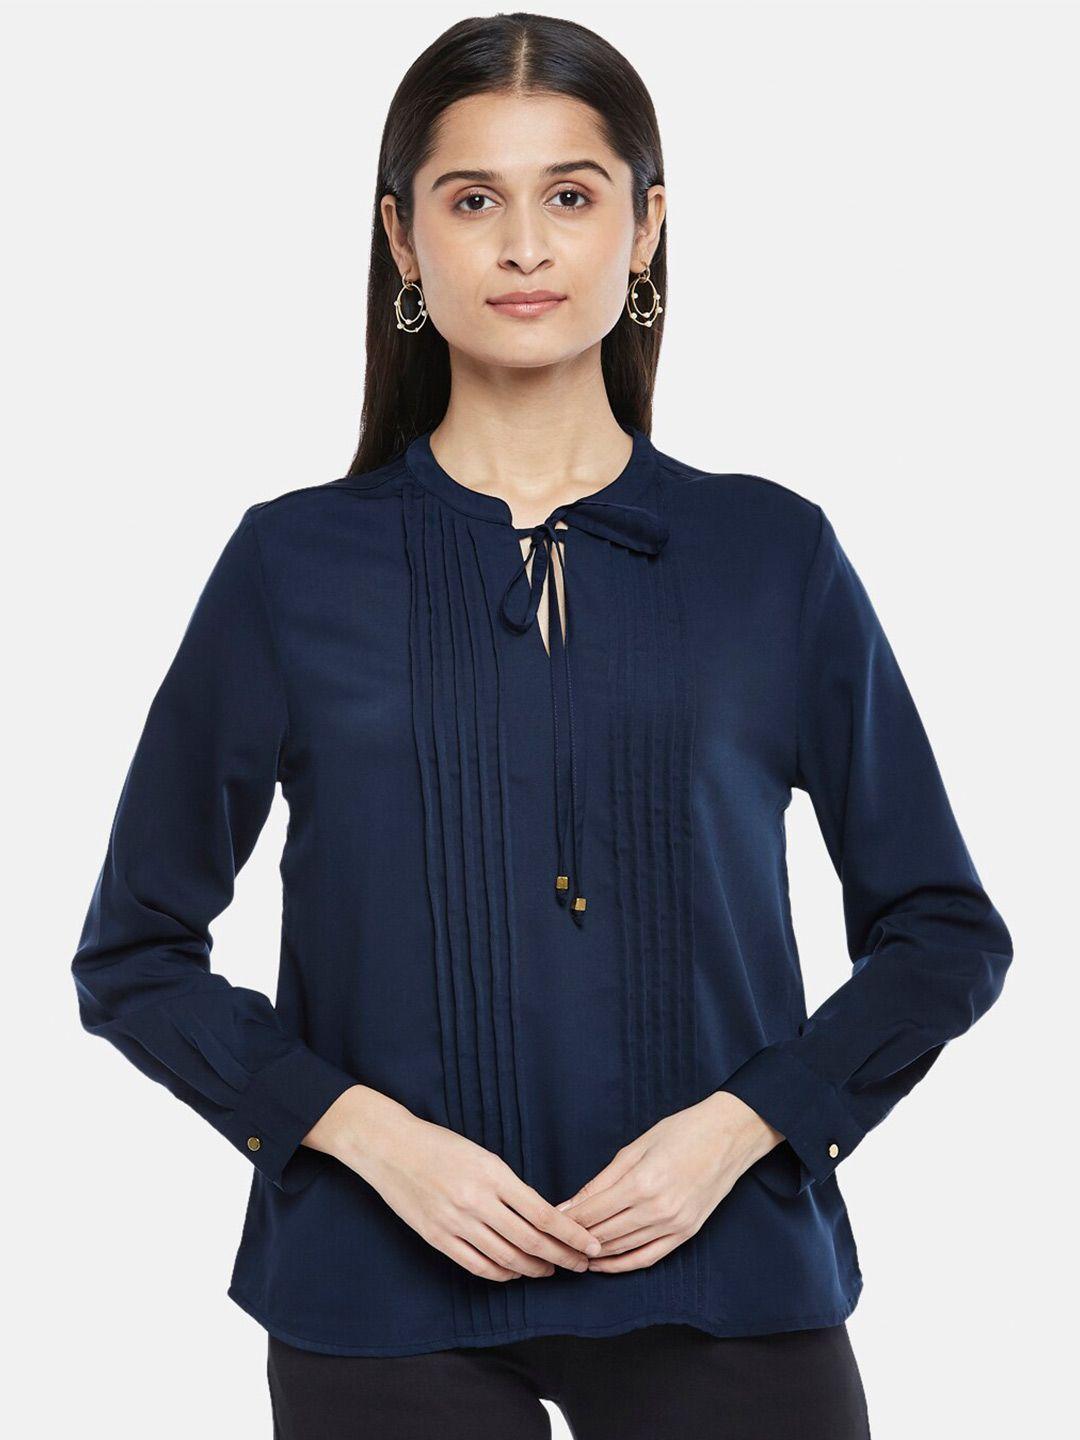 annabelle by pantaloons navy blue tie-up neck shirt style top